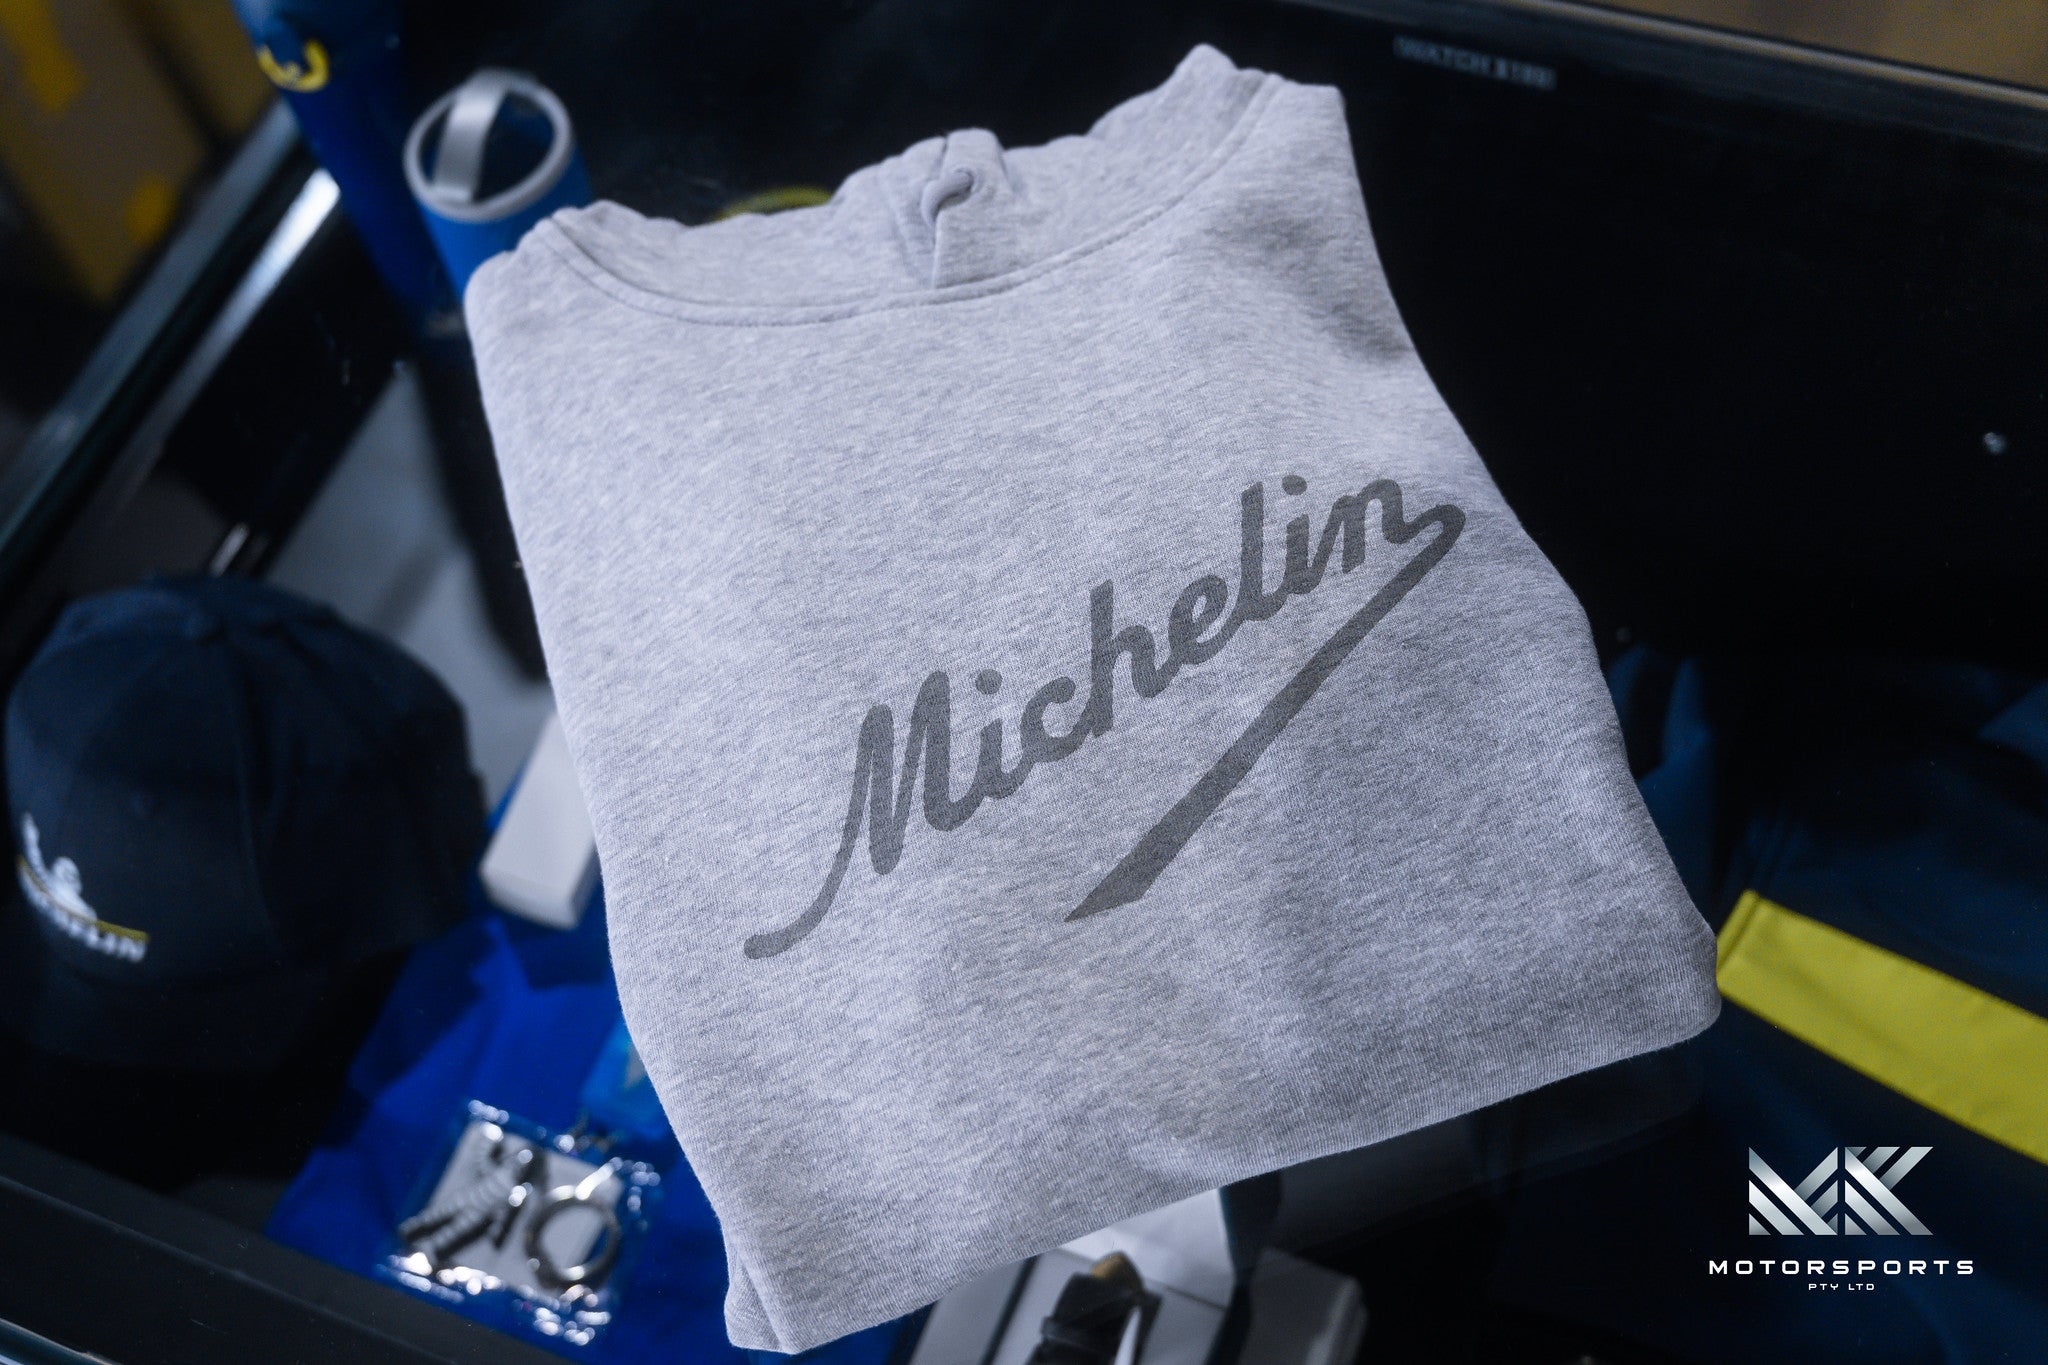 Michelin Ecological Heritage Signature Hoodie - Premium Merchandise from Merch - From just $69.0! Shop now at MK MOTORSPORTS